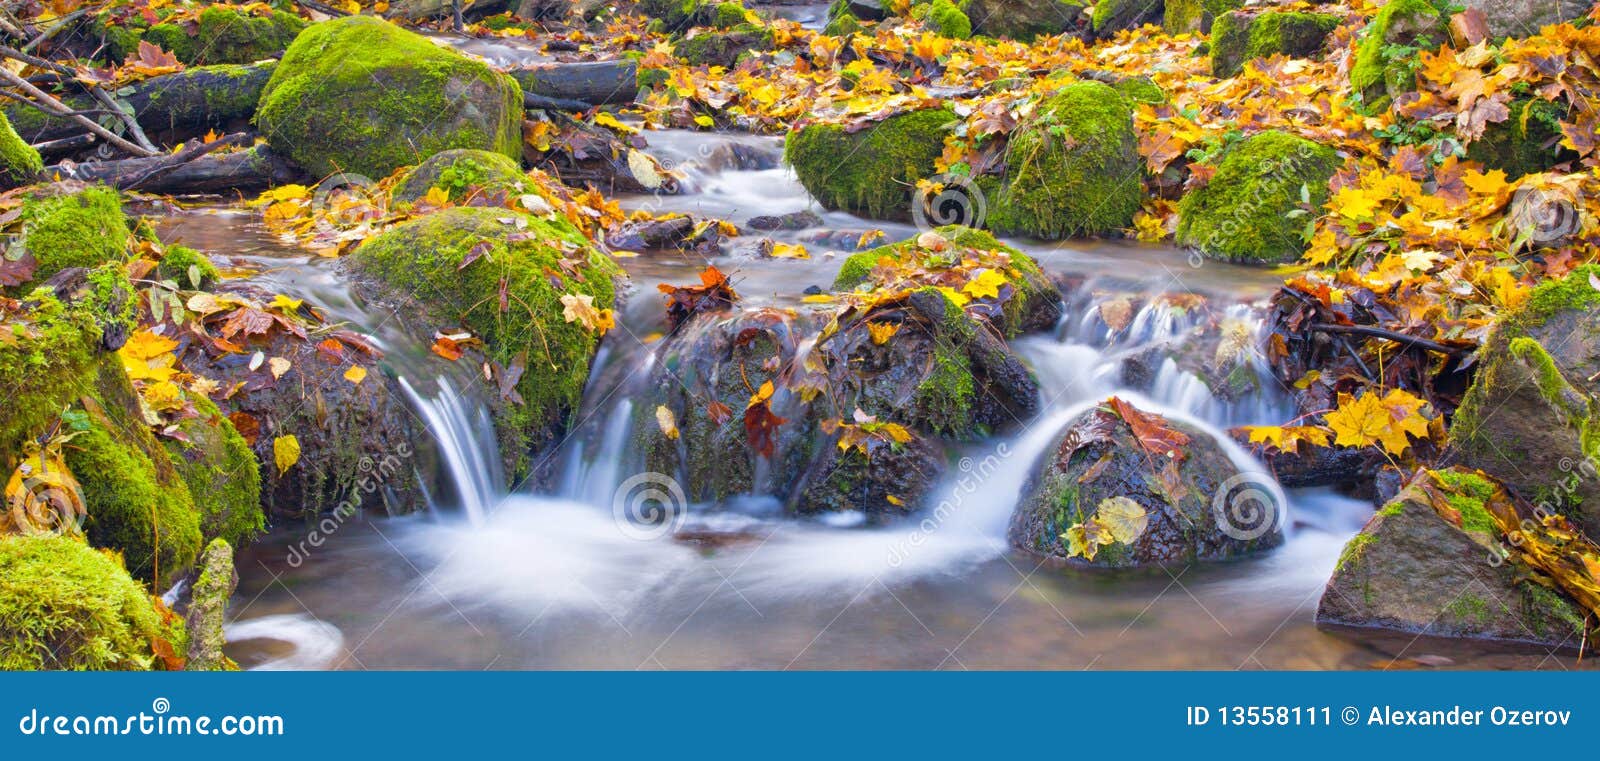 Beautiful Cascade Waterfall In Autumn Forest Stock Image Image Of